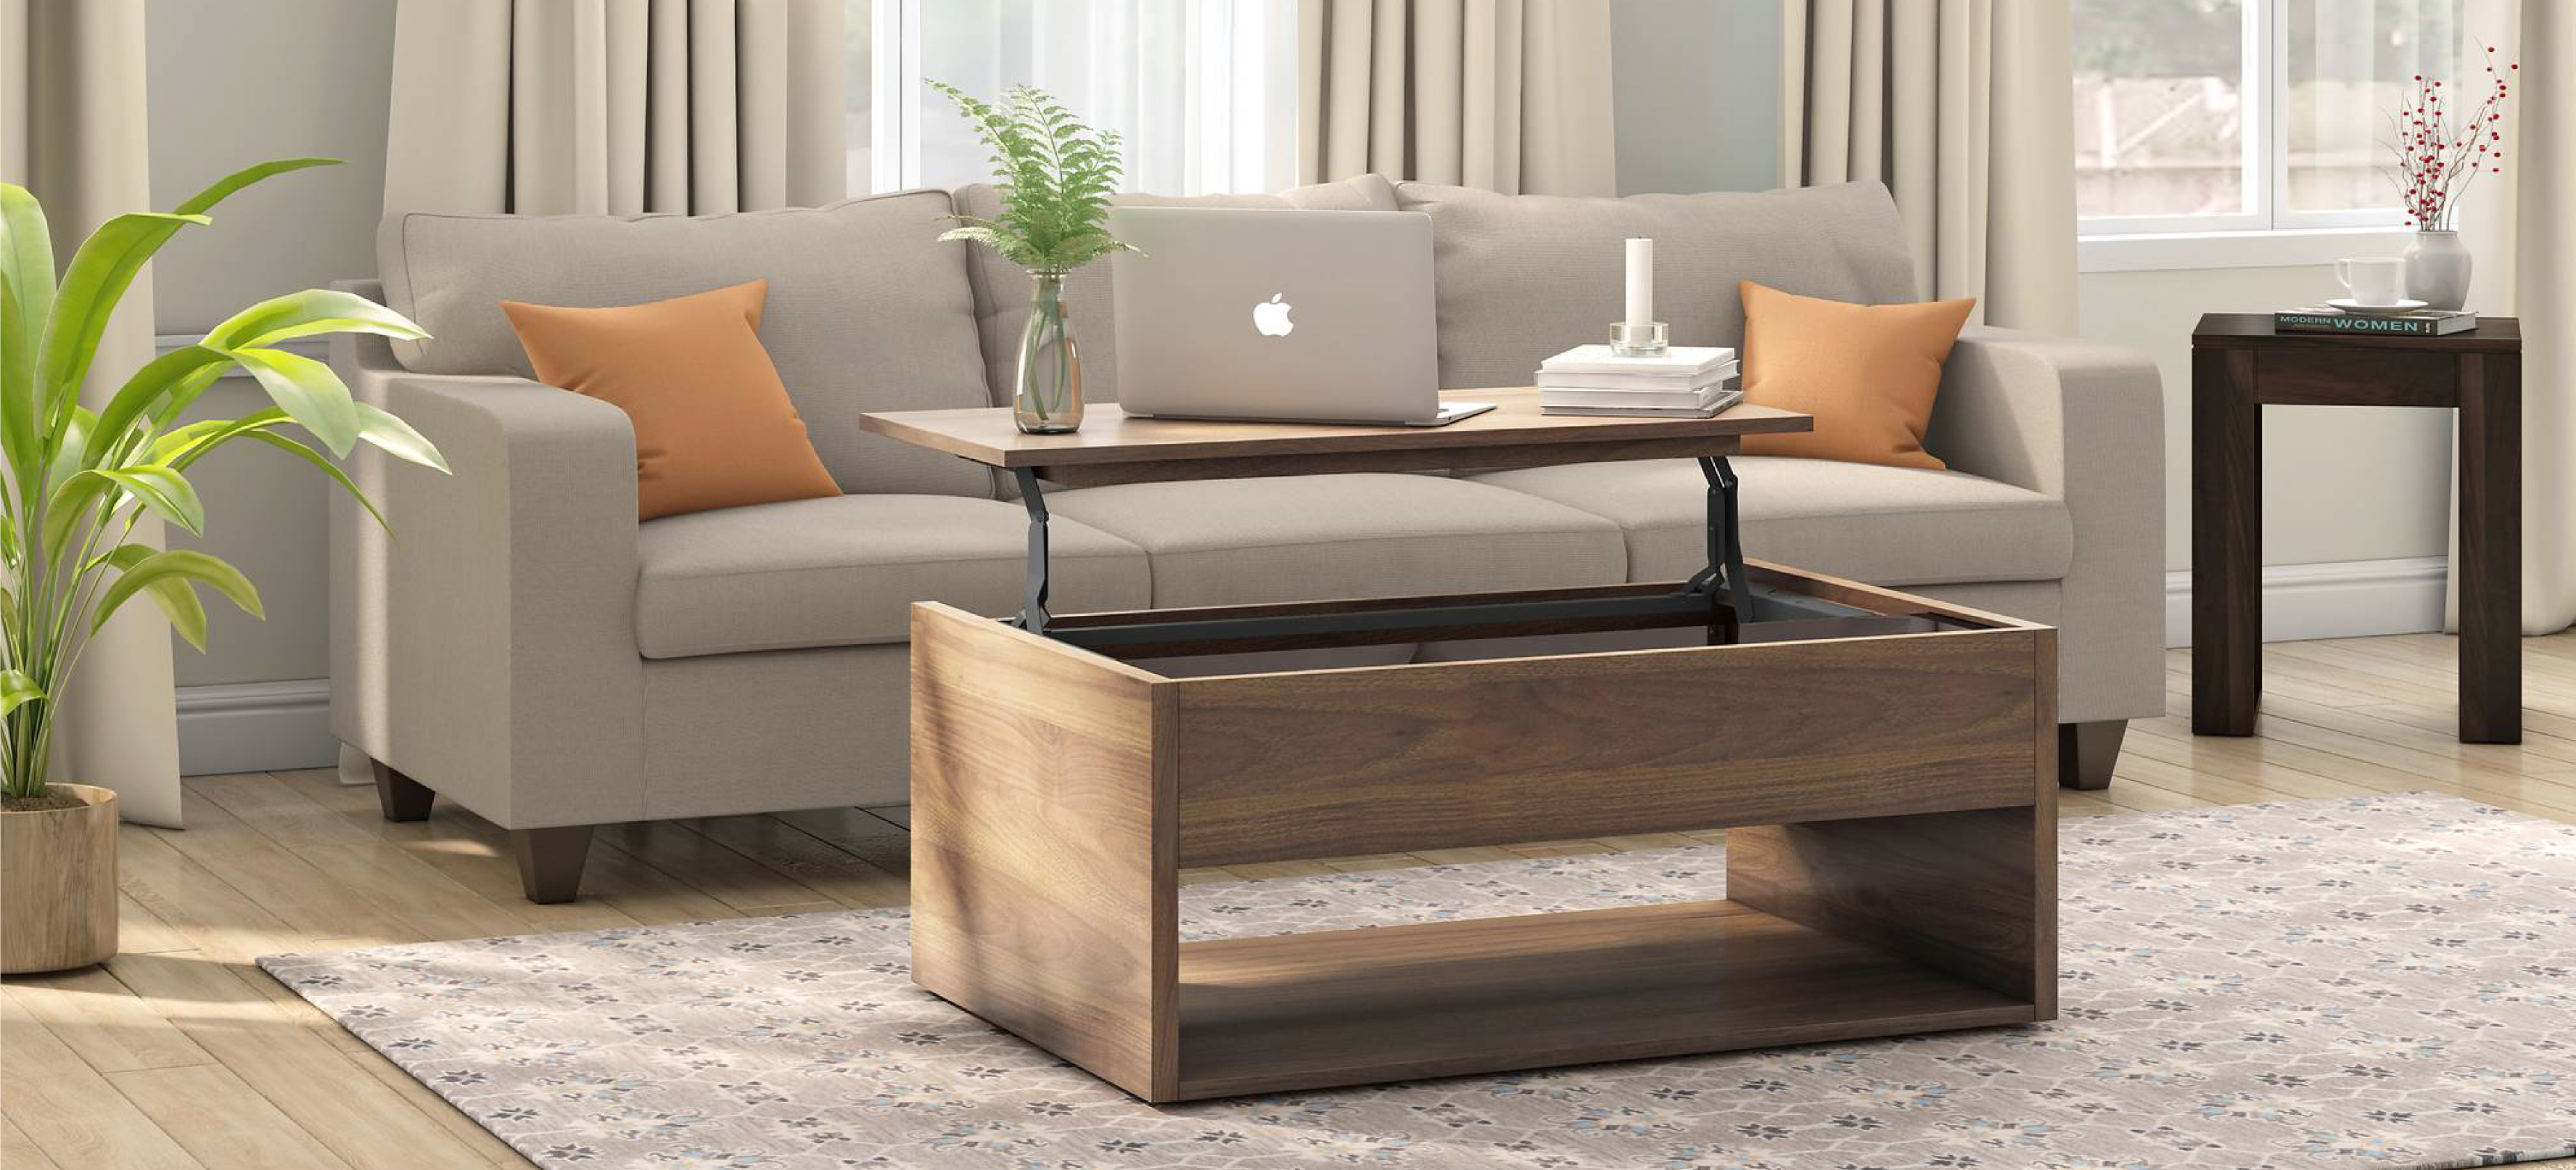 Create An Aesthetic Living Room With Coffee Table